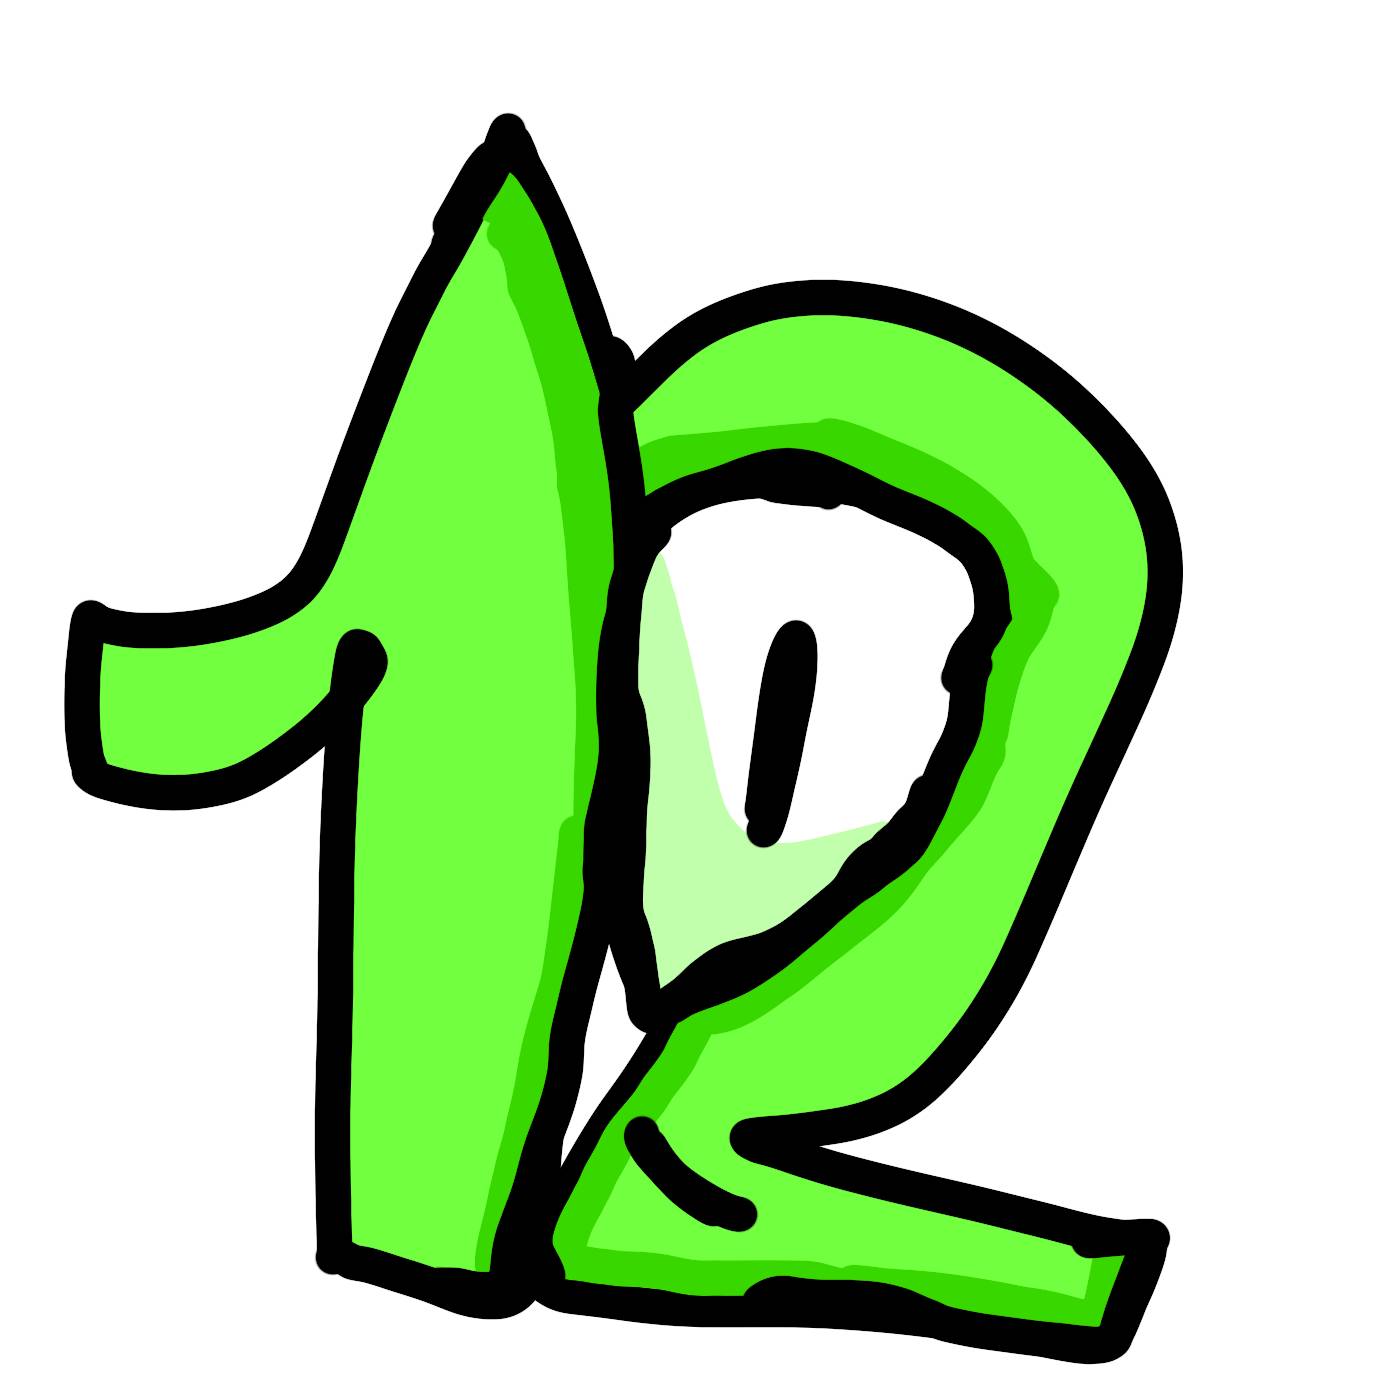 12 Number Lore Sticker - 12 Number lore Numberlore - Discover & Share GIFs